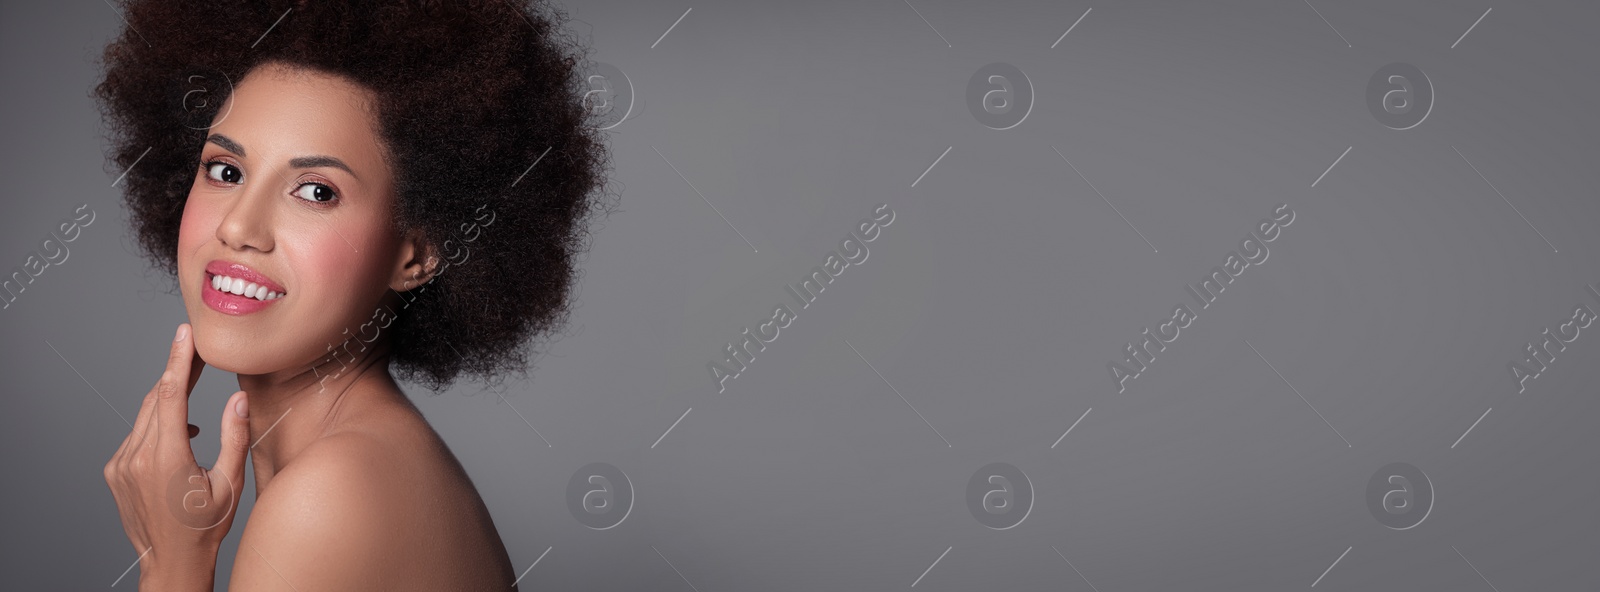 Image of Portrait of beautiful young woman on grey background. Banner design with space for text